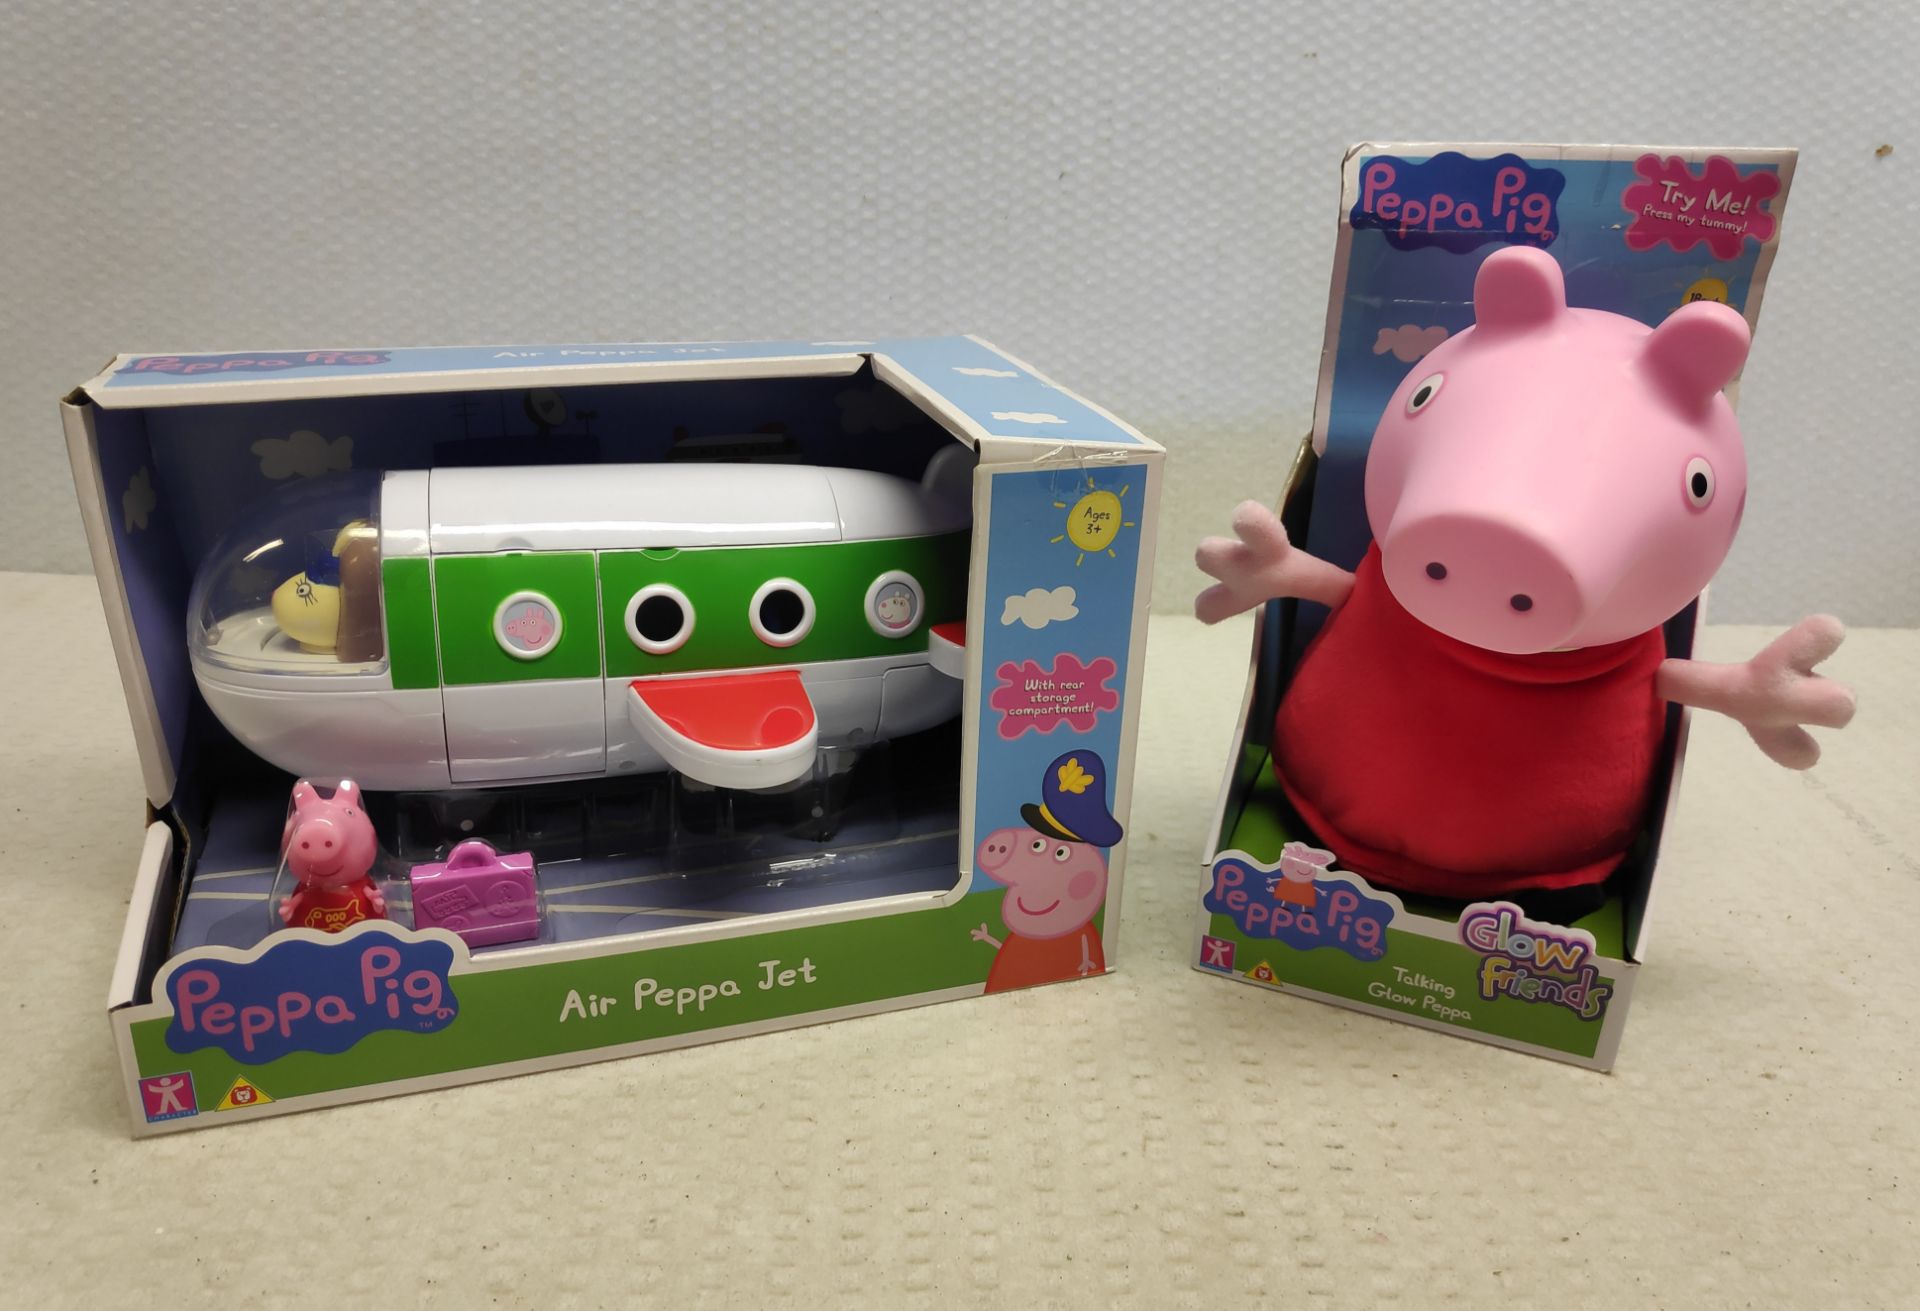 2 x Peppa Pig Toys - Glow Friends Peppa and Air Peppa Jet - New/Boxed